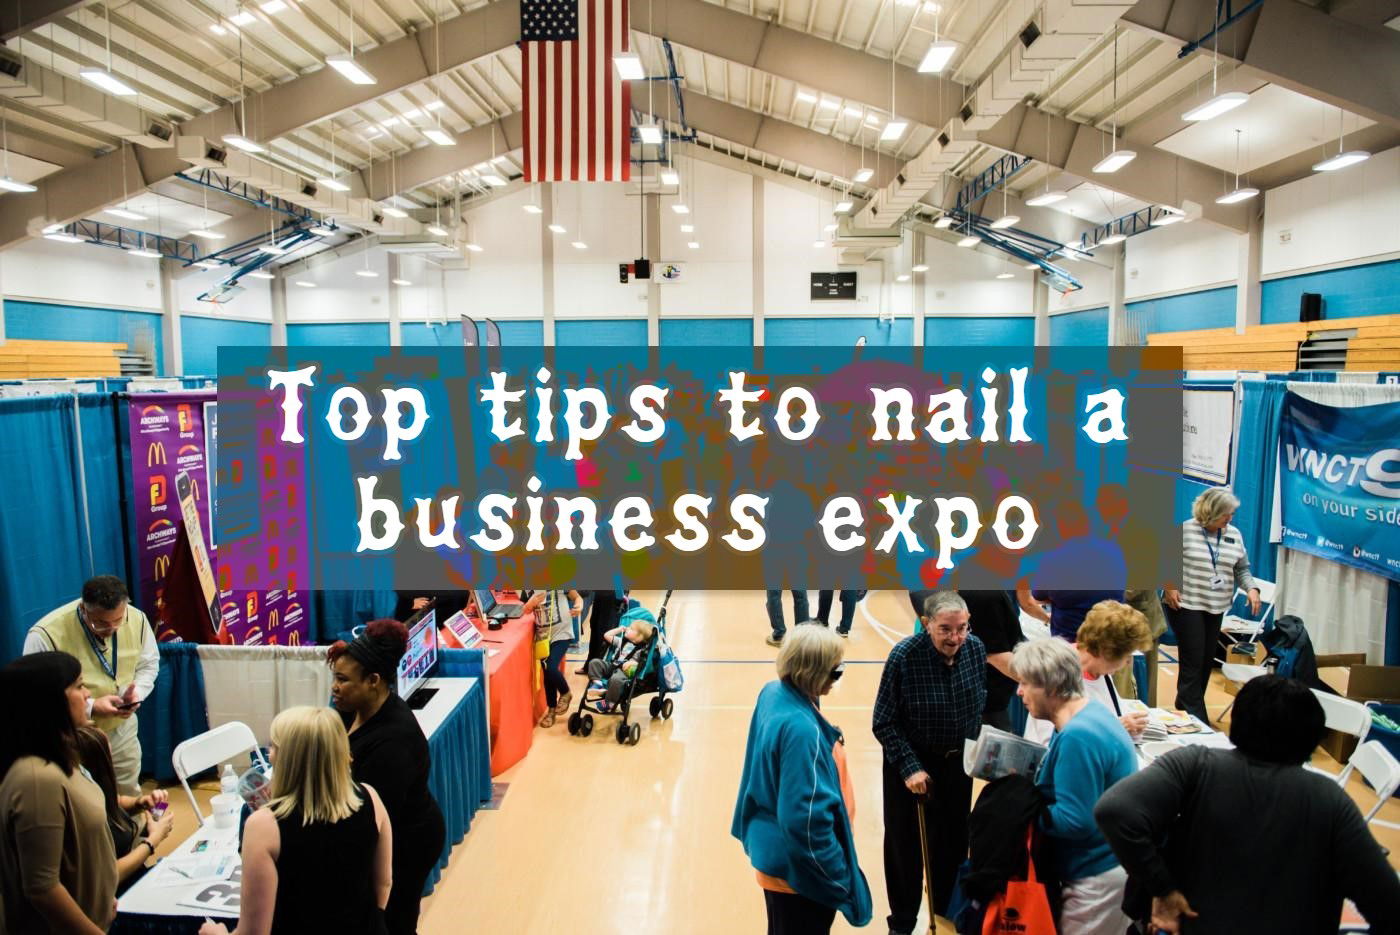 Top tips to nail a business expo